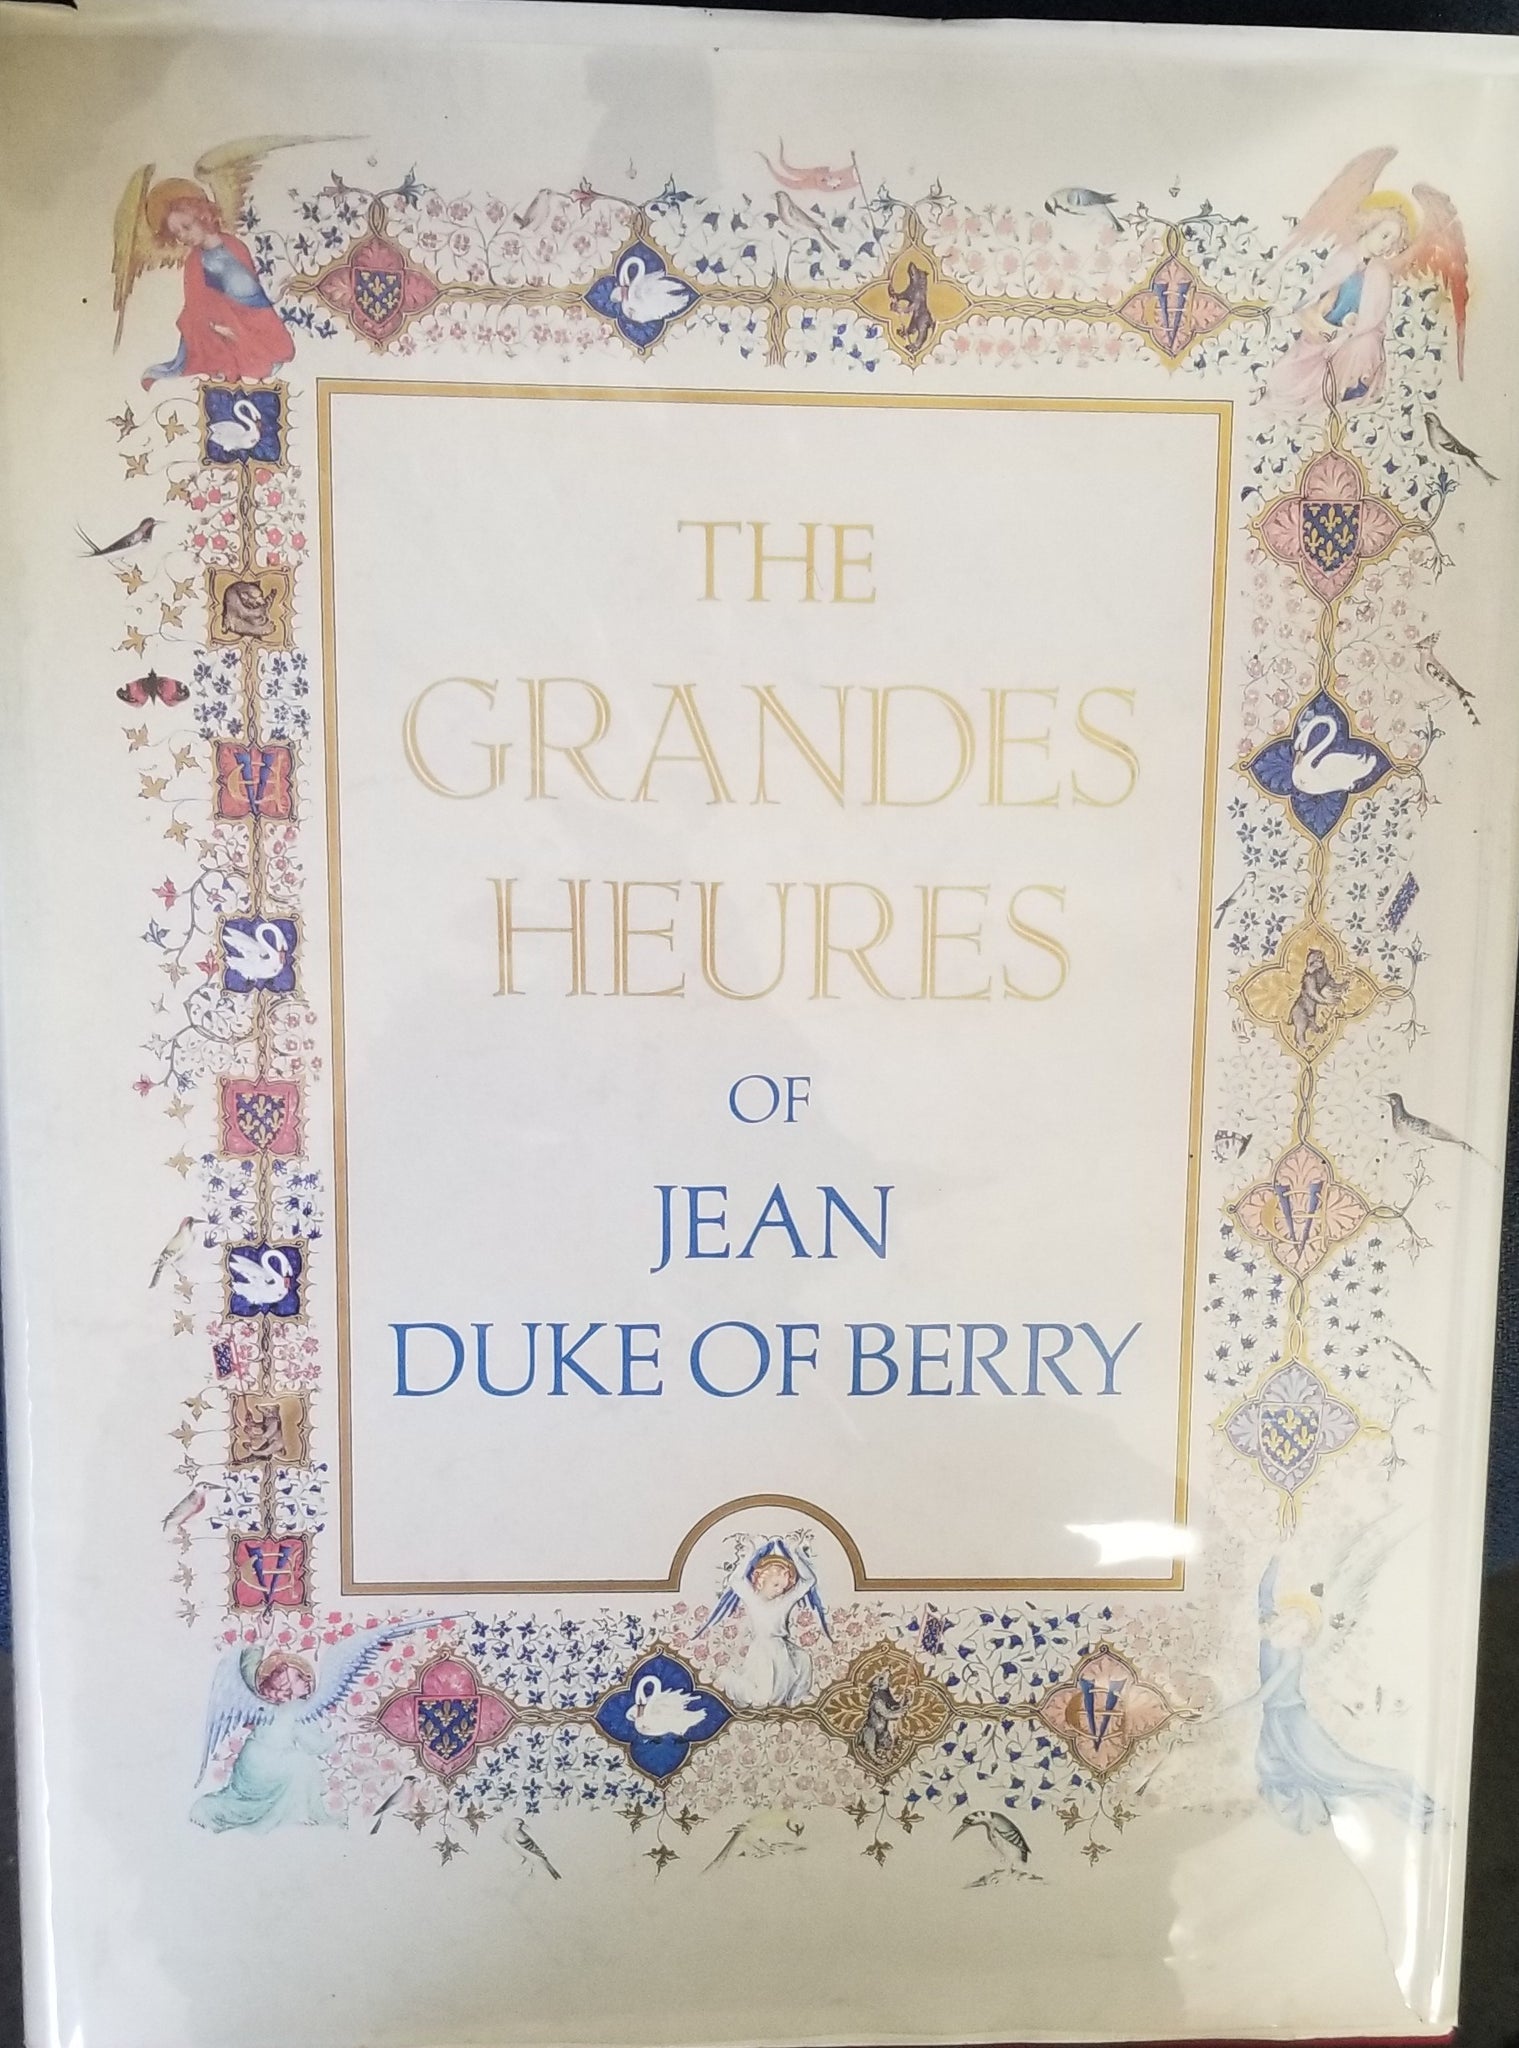 THE GRANDES HEURES OF JEAN, DUKE OF BERRY